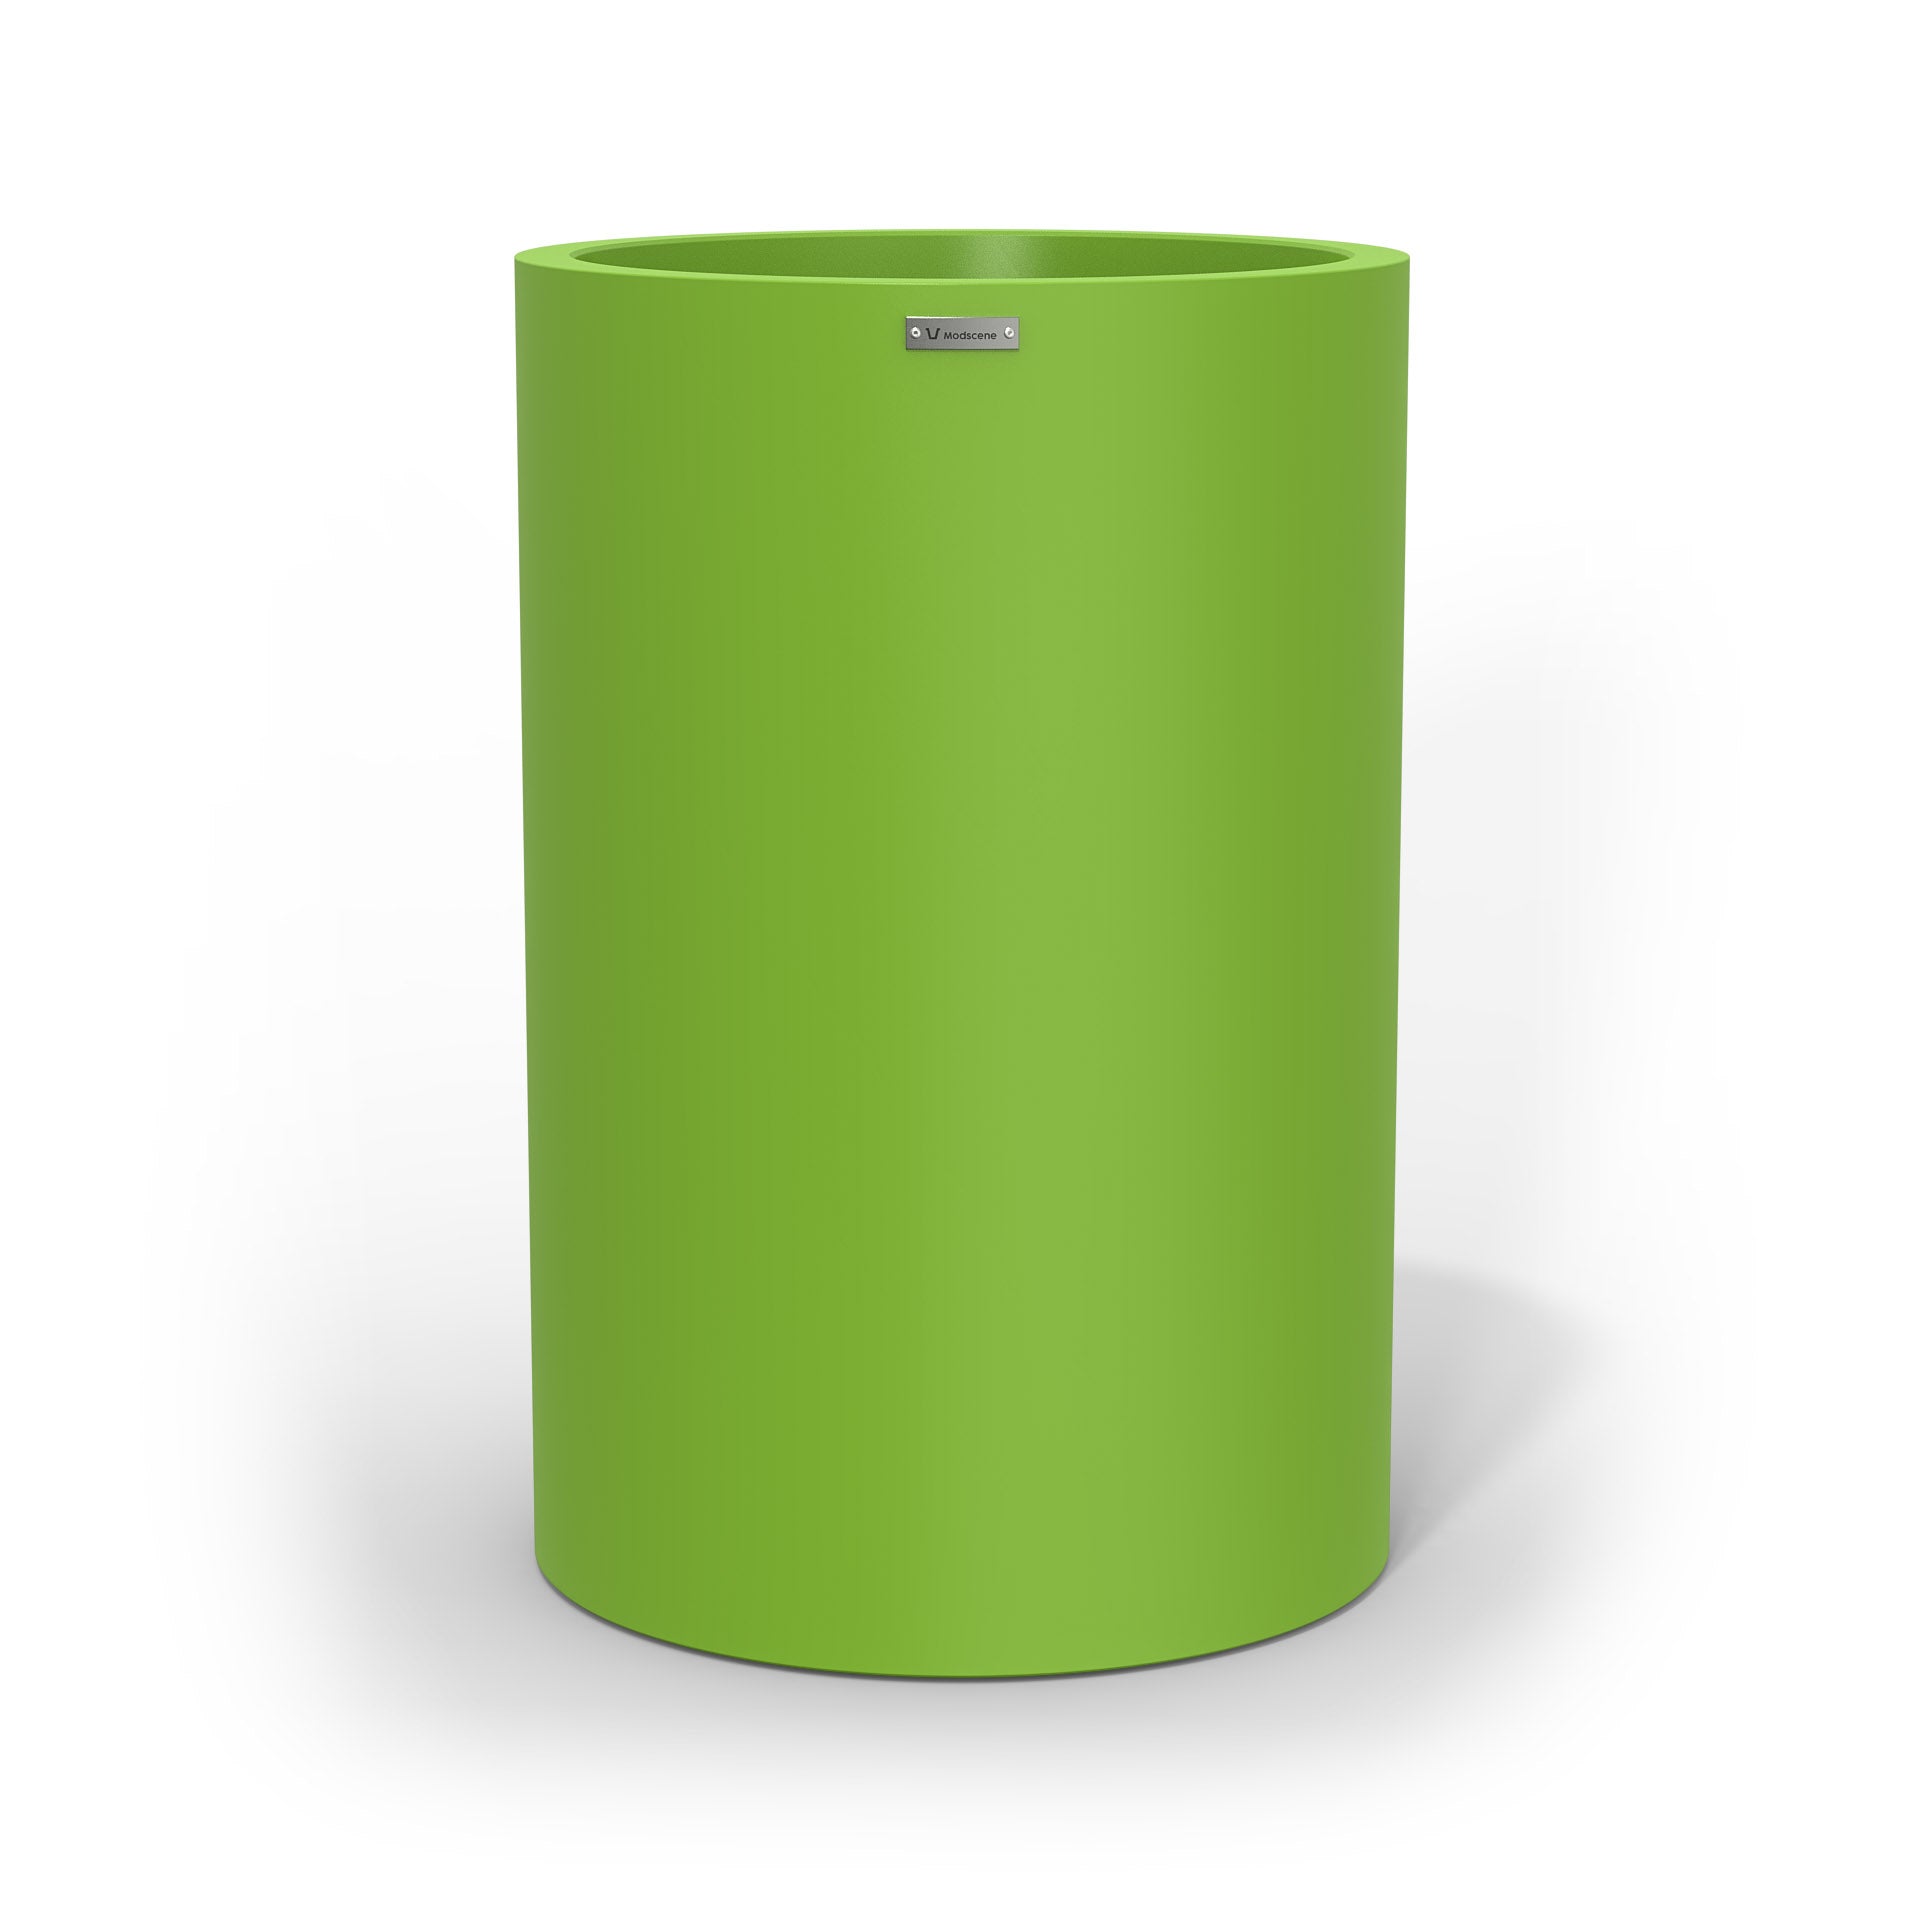 A tall lime green cylinder shaped planter pot by Modscene New Zealand.